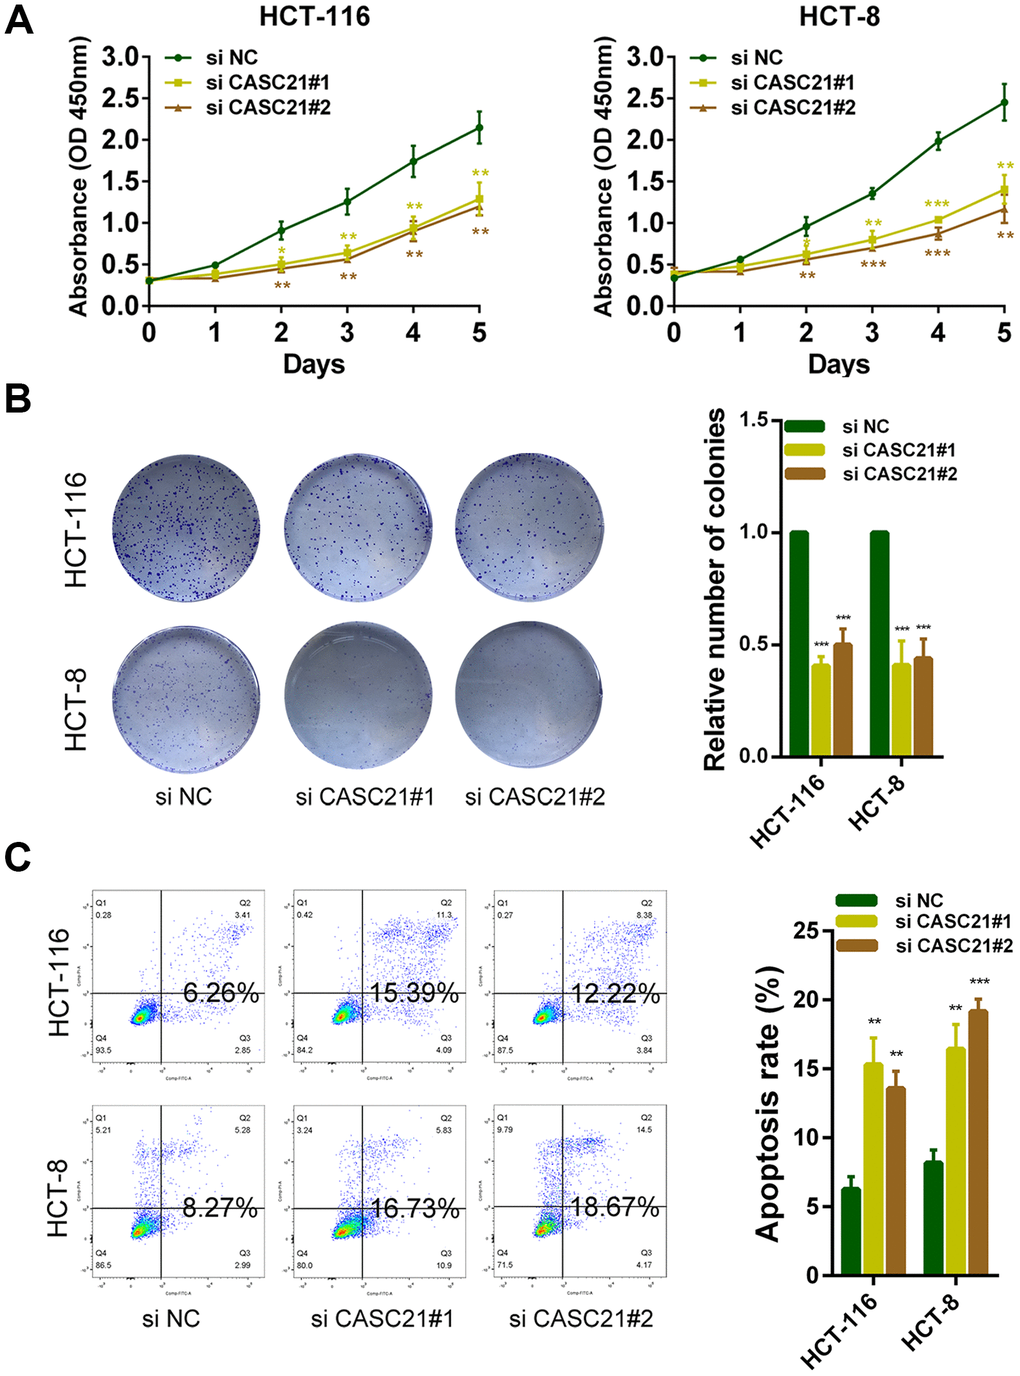 CASC21 promotes CRC cells growth in vitro. (A) CCK-8 assays of HCT-116 and HCT-8 cells transfected with CASC21 siRNAs. (B) HCT-116 and HCT-8 cells transfected with CASC21 siRNAs were seeded onto 6-well plates. The number of colonies was counted on the 14th day after seeding. (C) Flow cytometric cell apoptosis assays used to assess the effect of CASC21 knockdown on cell apoptosis. All data represent mean ± SEM (n = 3-6). *P 